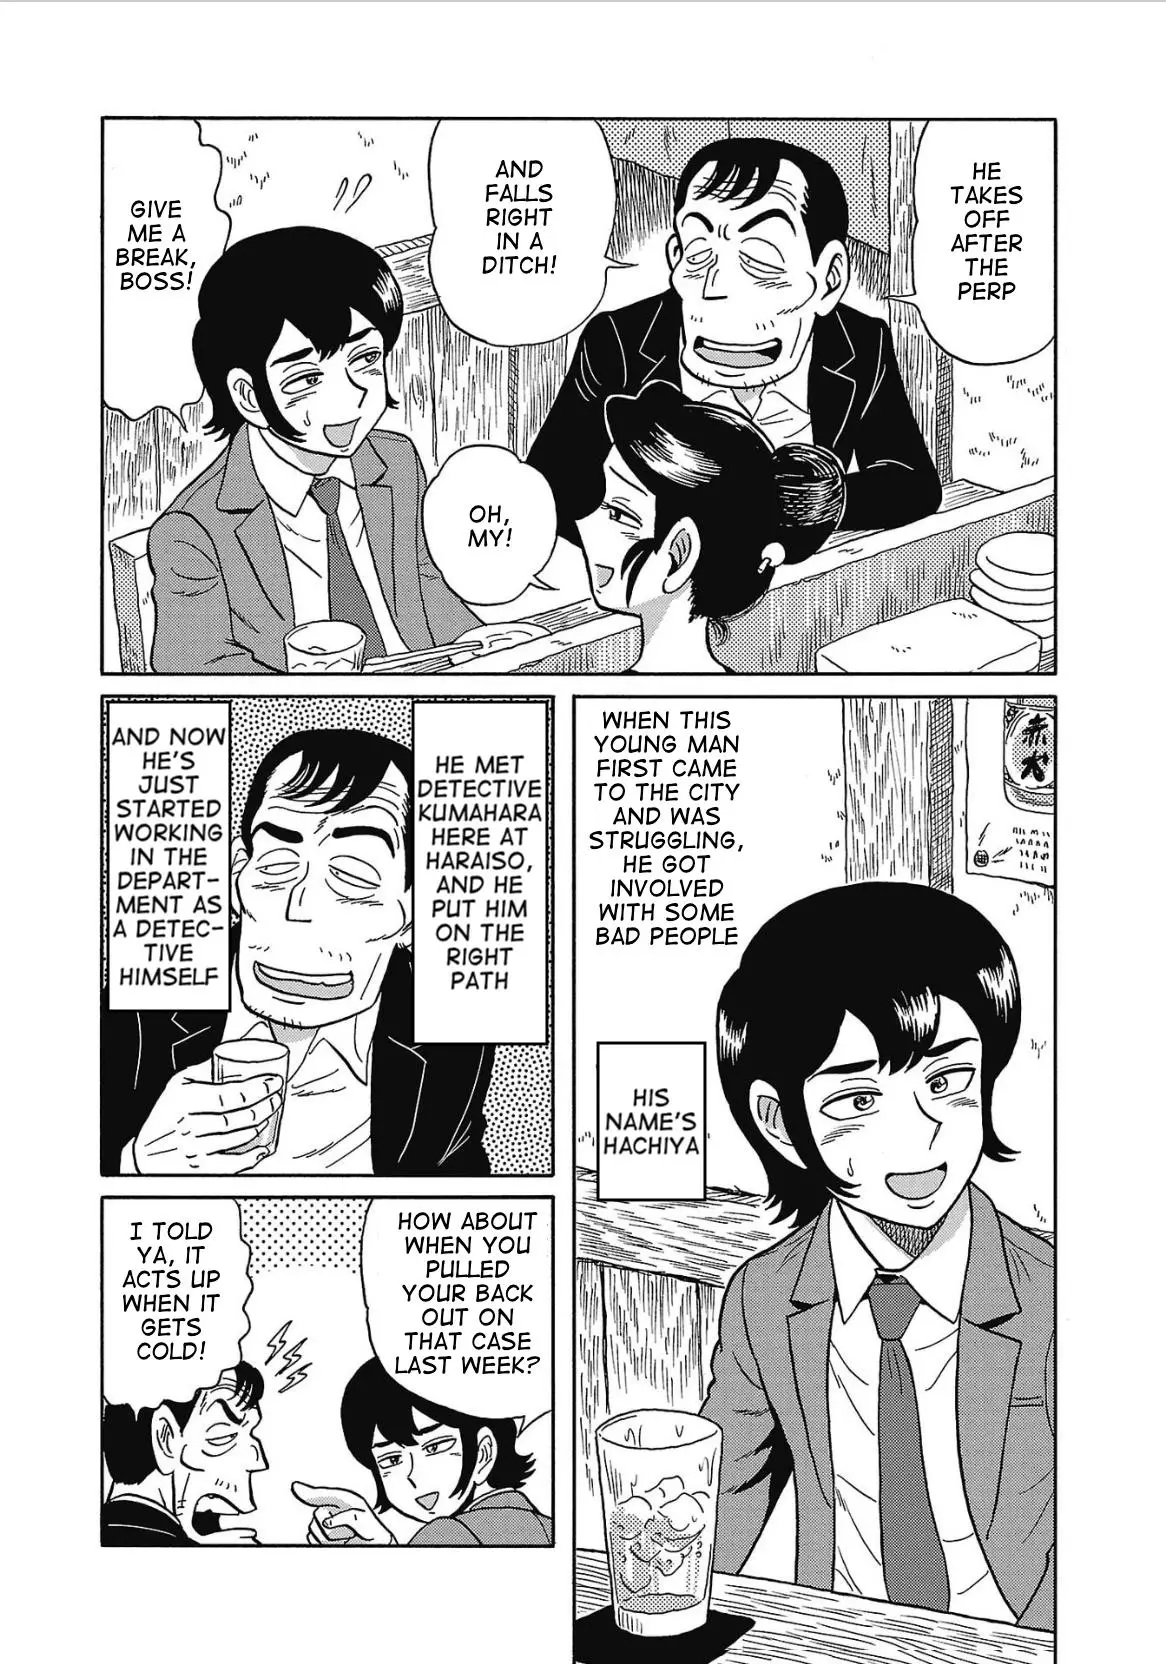 Haraiso Days - 20 page 2-1a1d8bf2